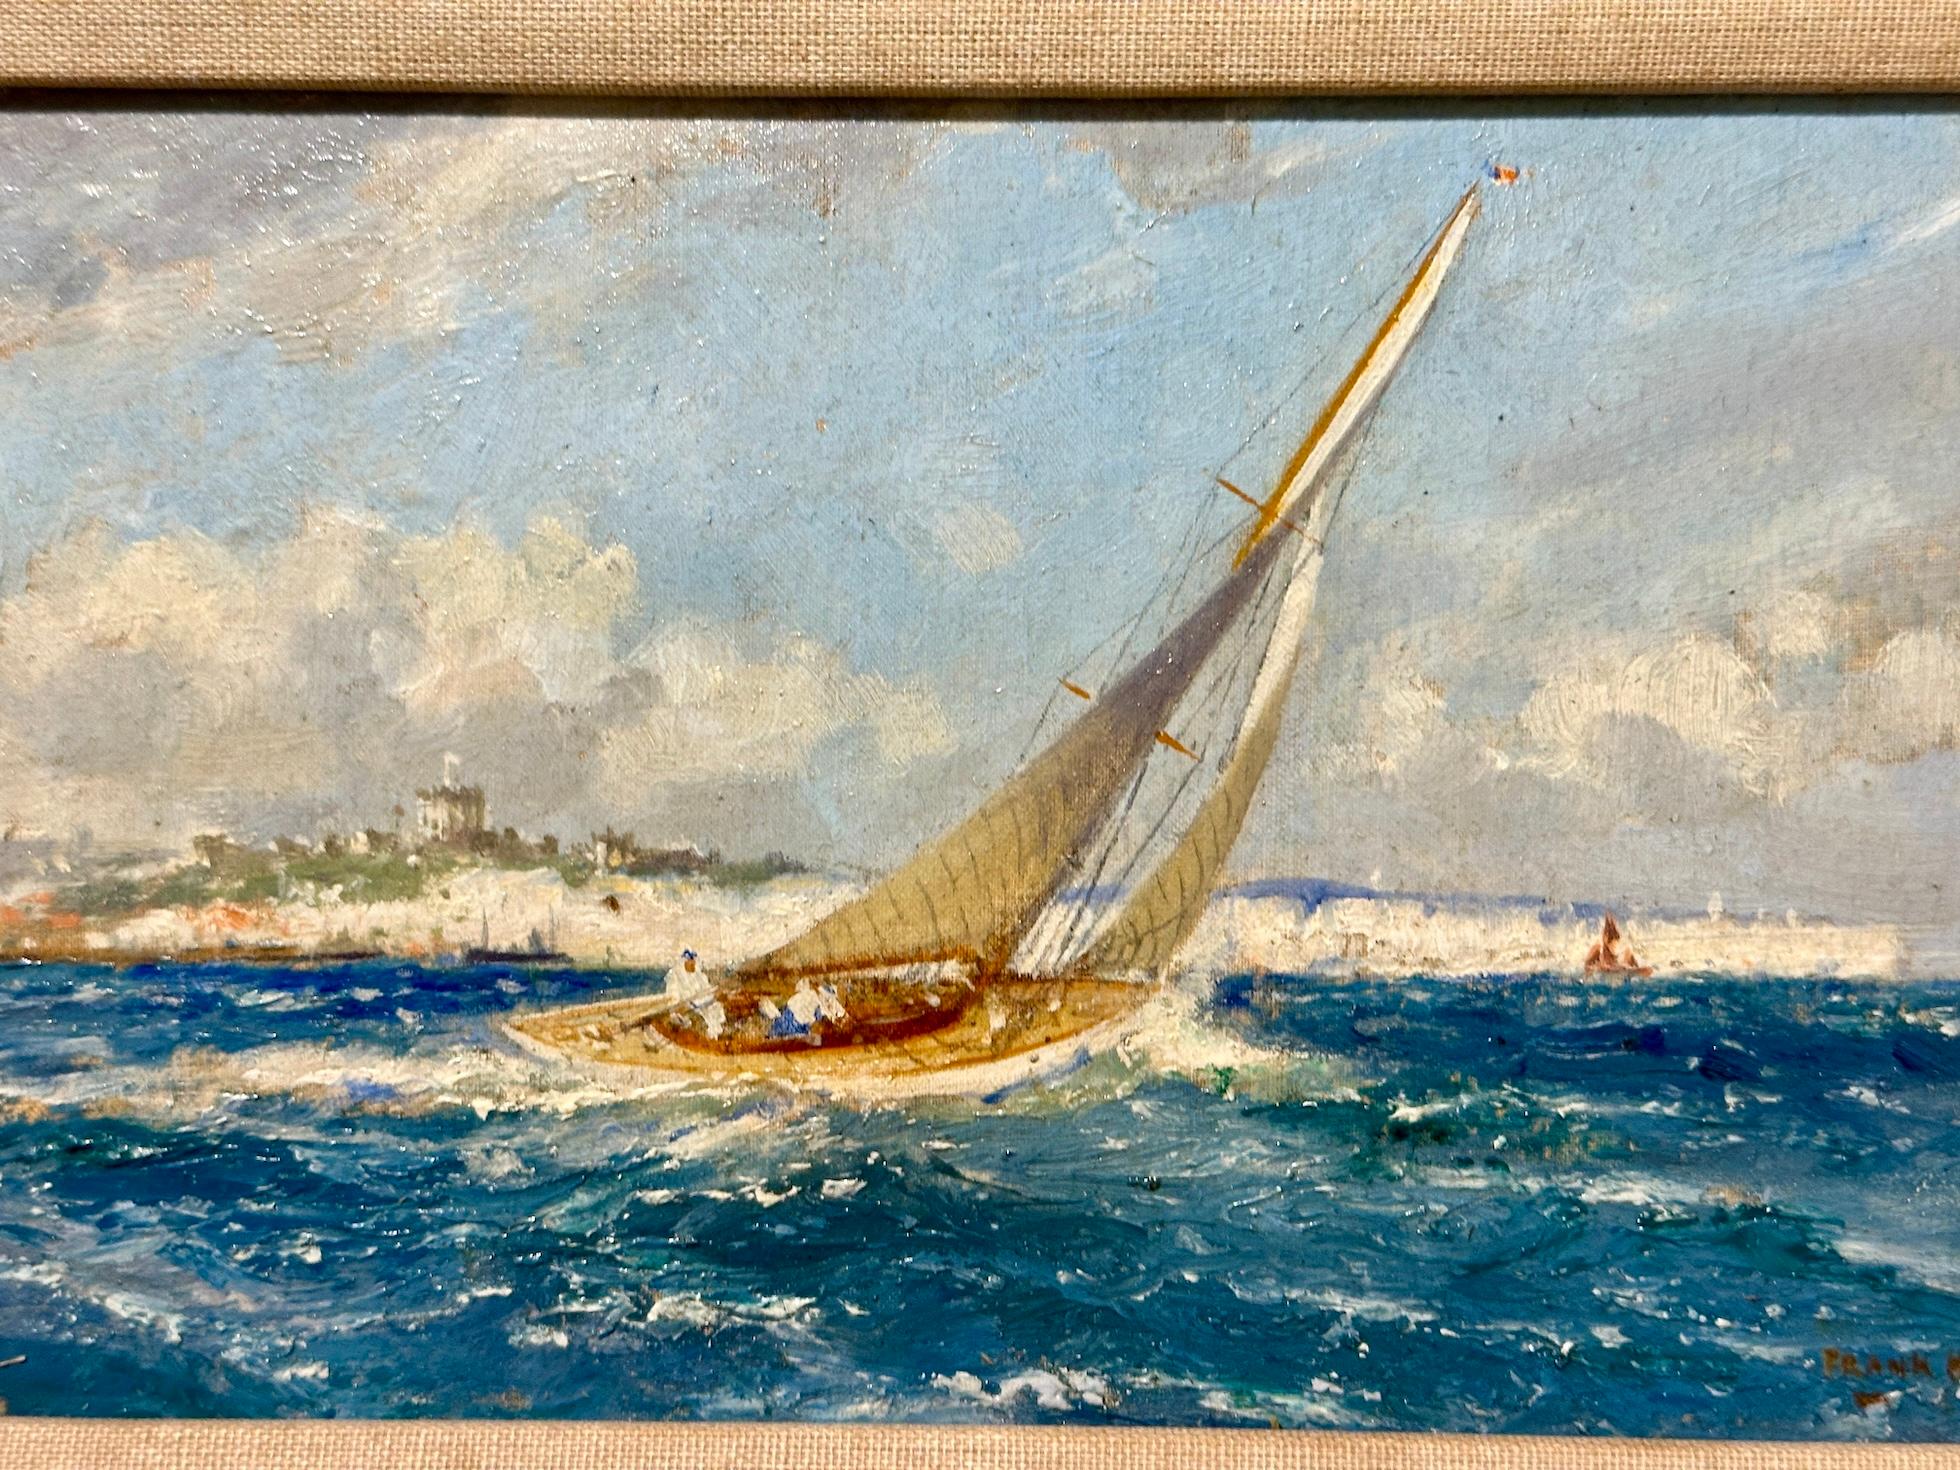 English yacht racing, sailing in the English Channel off the White Cliffs, Dover - Painting by Frank H Mason